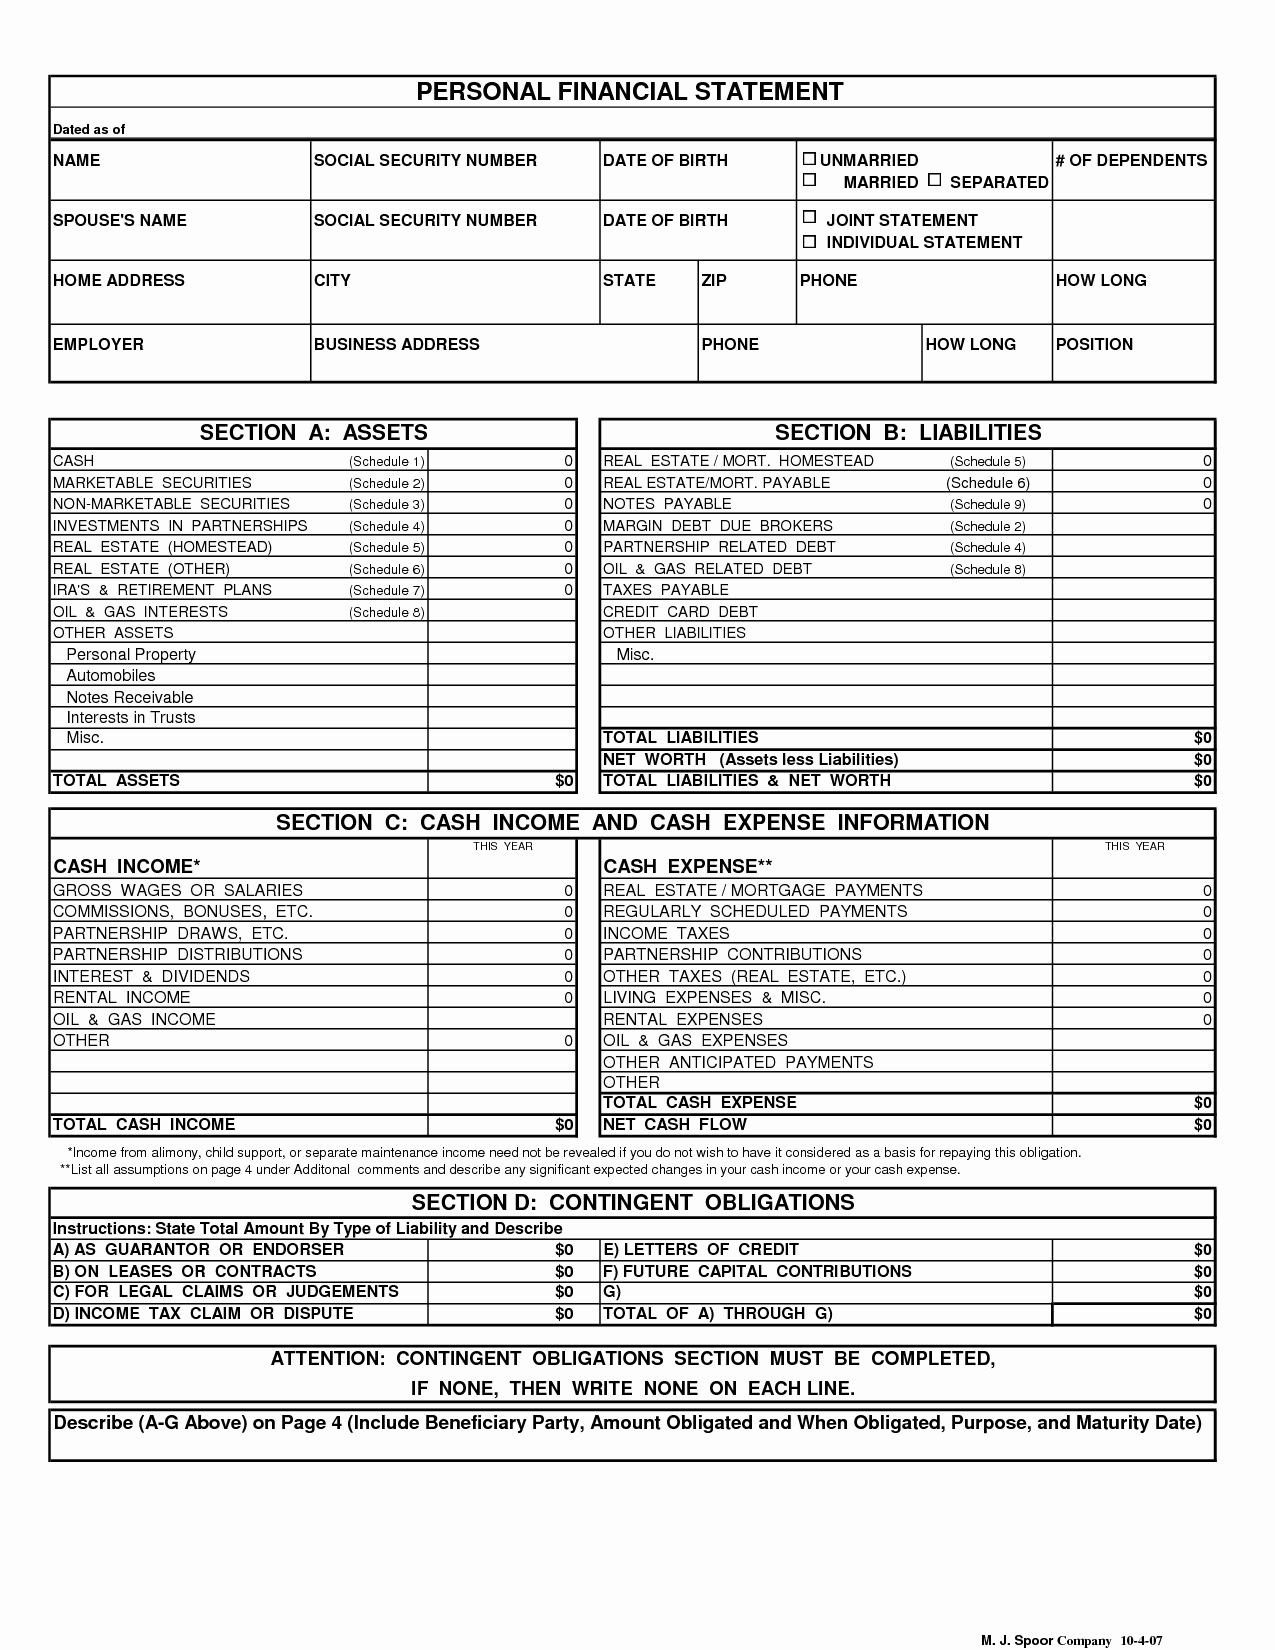 Free Financial Statement Template New Personal Financial Statement Template